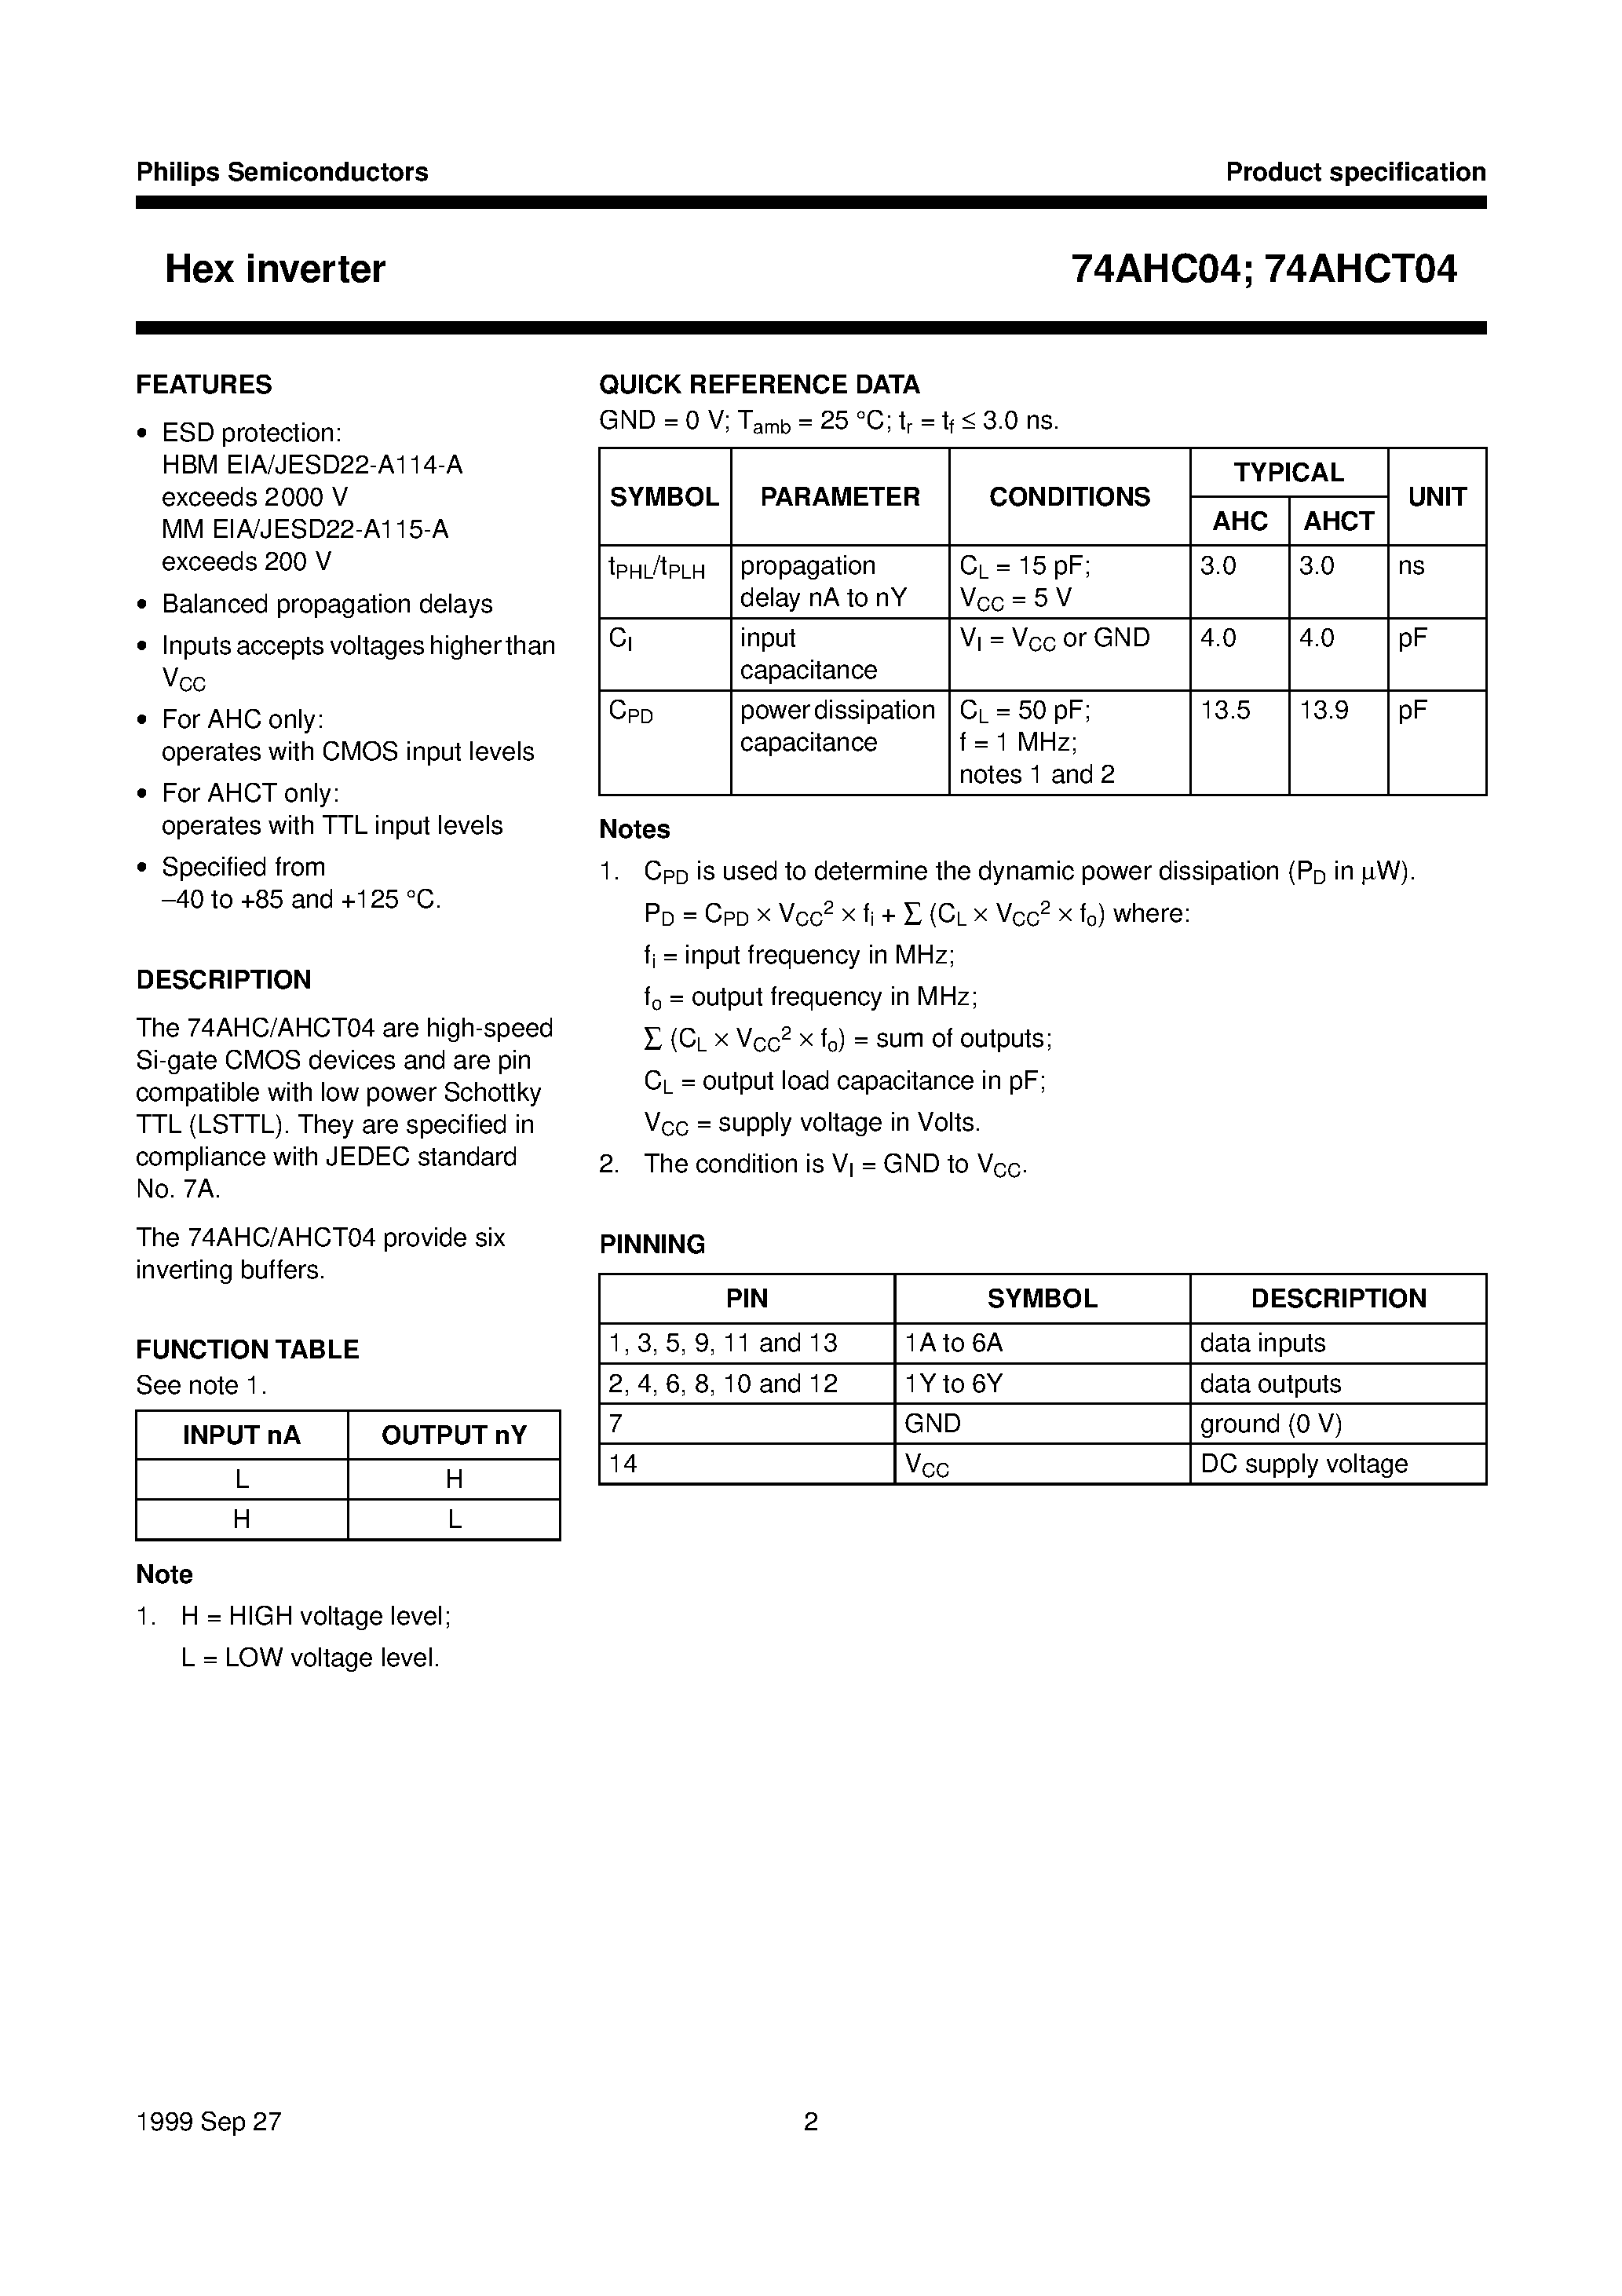 Datasheet 74AHC04 - Hex inverter page 2